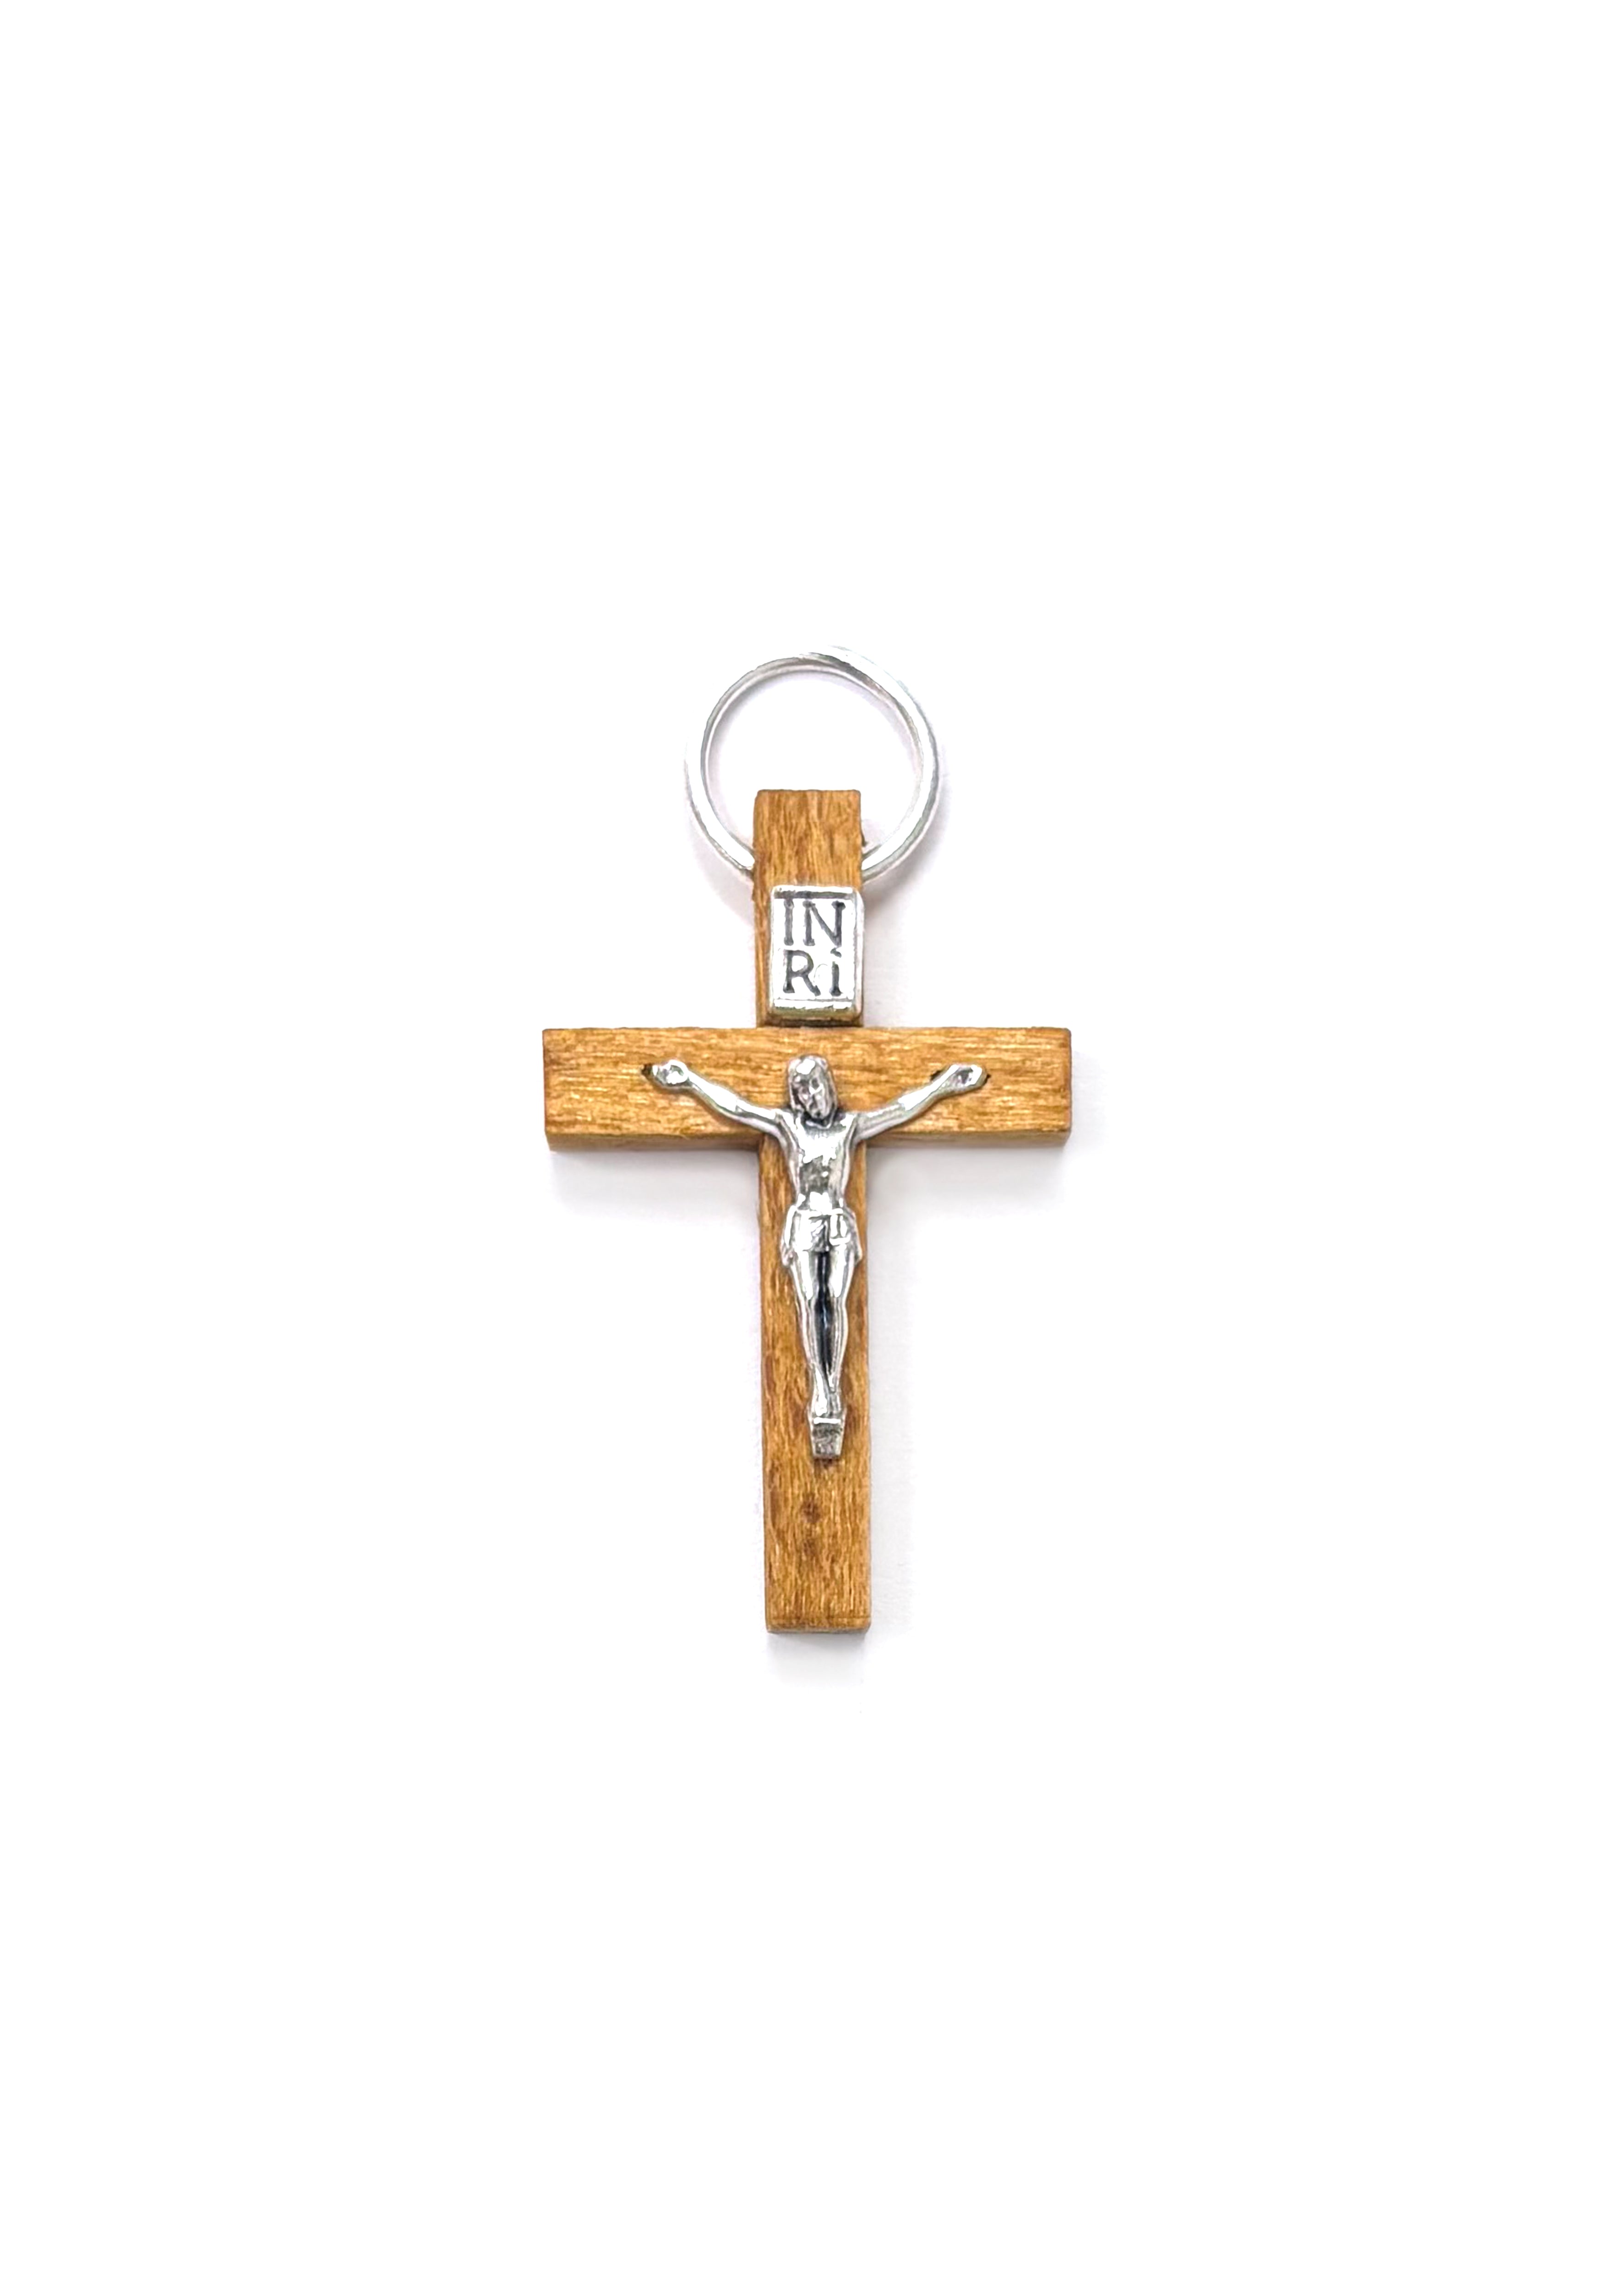 Small rustic wooden crucifix with silver metal body